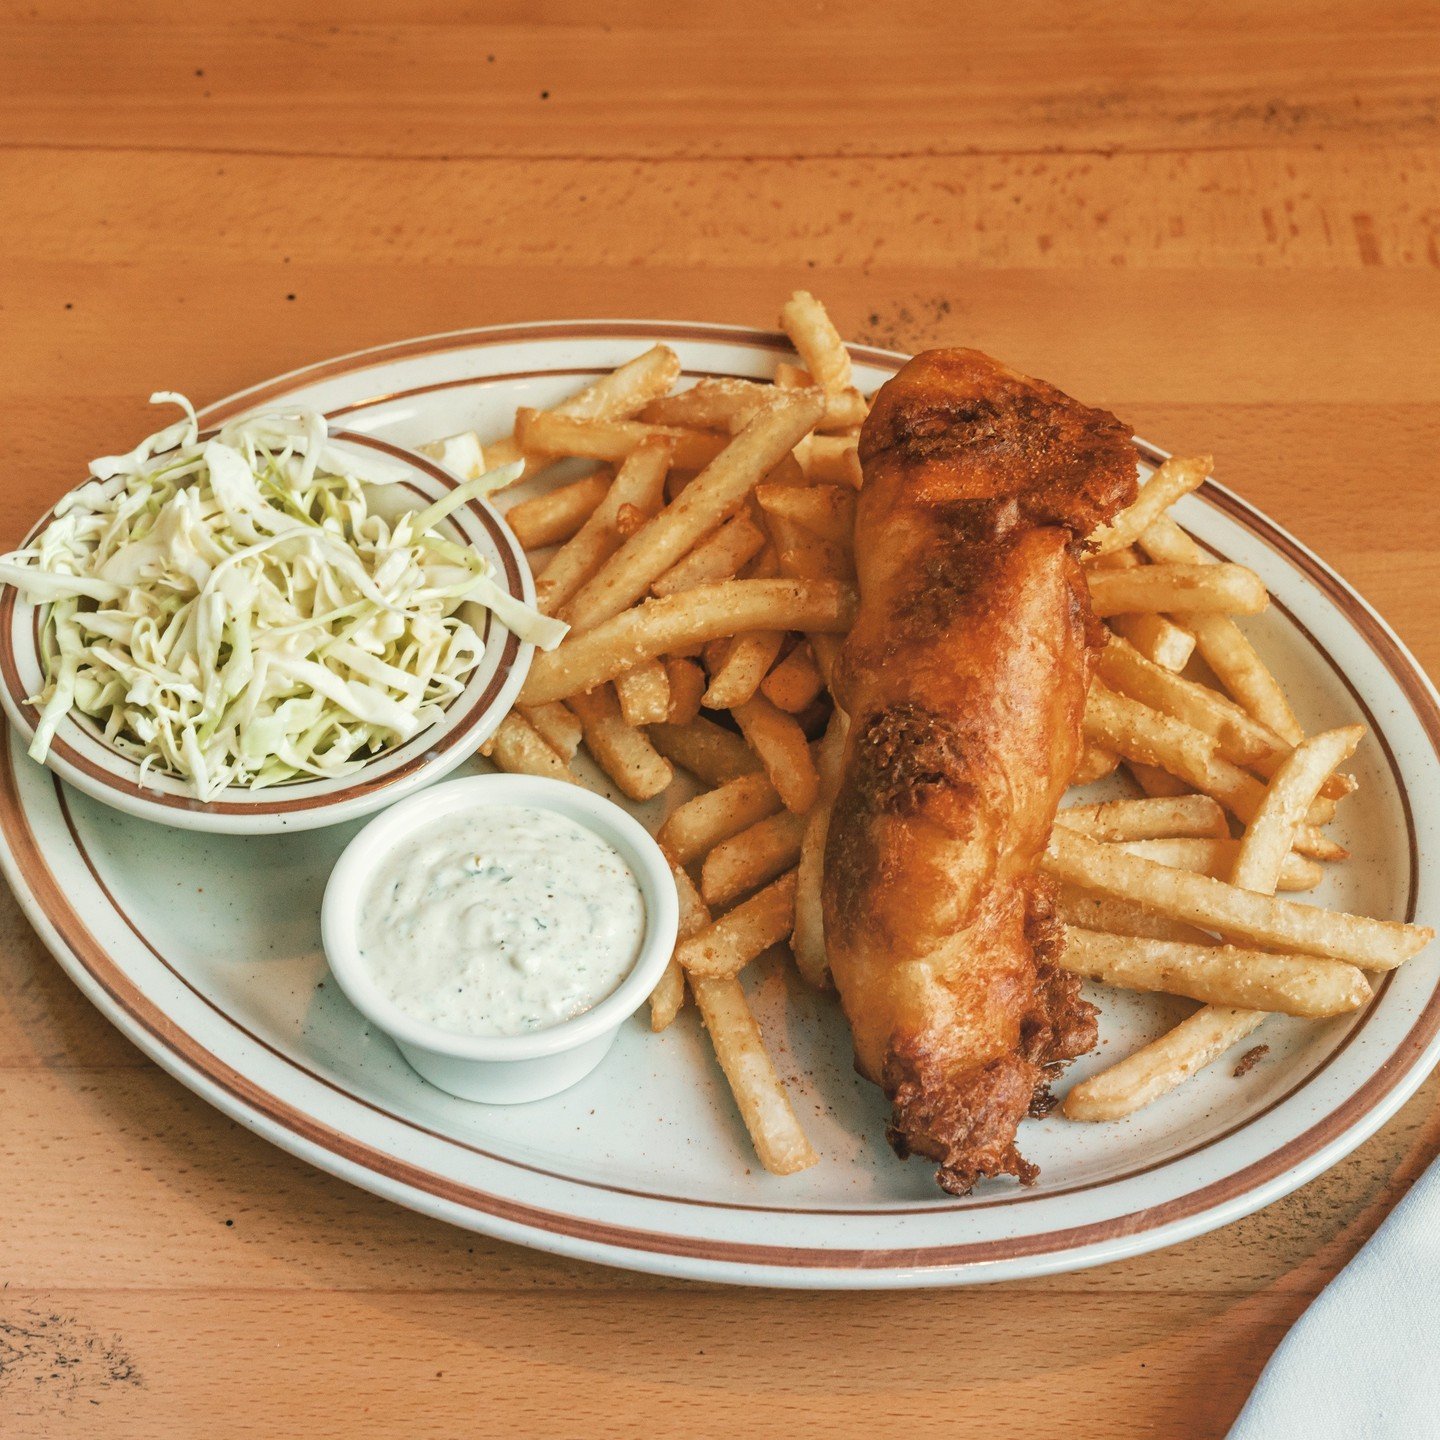 Few dishes say &quot;Pub Classic&quot; quite like Fish and Chips. At The Halfway Club, Chef Jason dips fresh Atlantic Cod in beer batter and fries to a beautiful golden brown and serves it with a house slaw and remoulade. But in a unique twist, the f